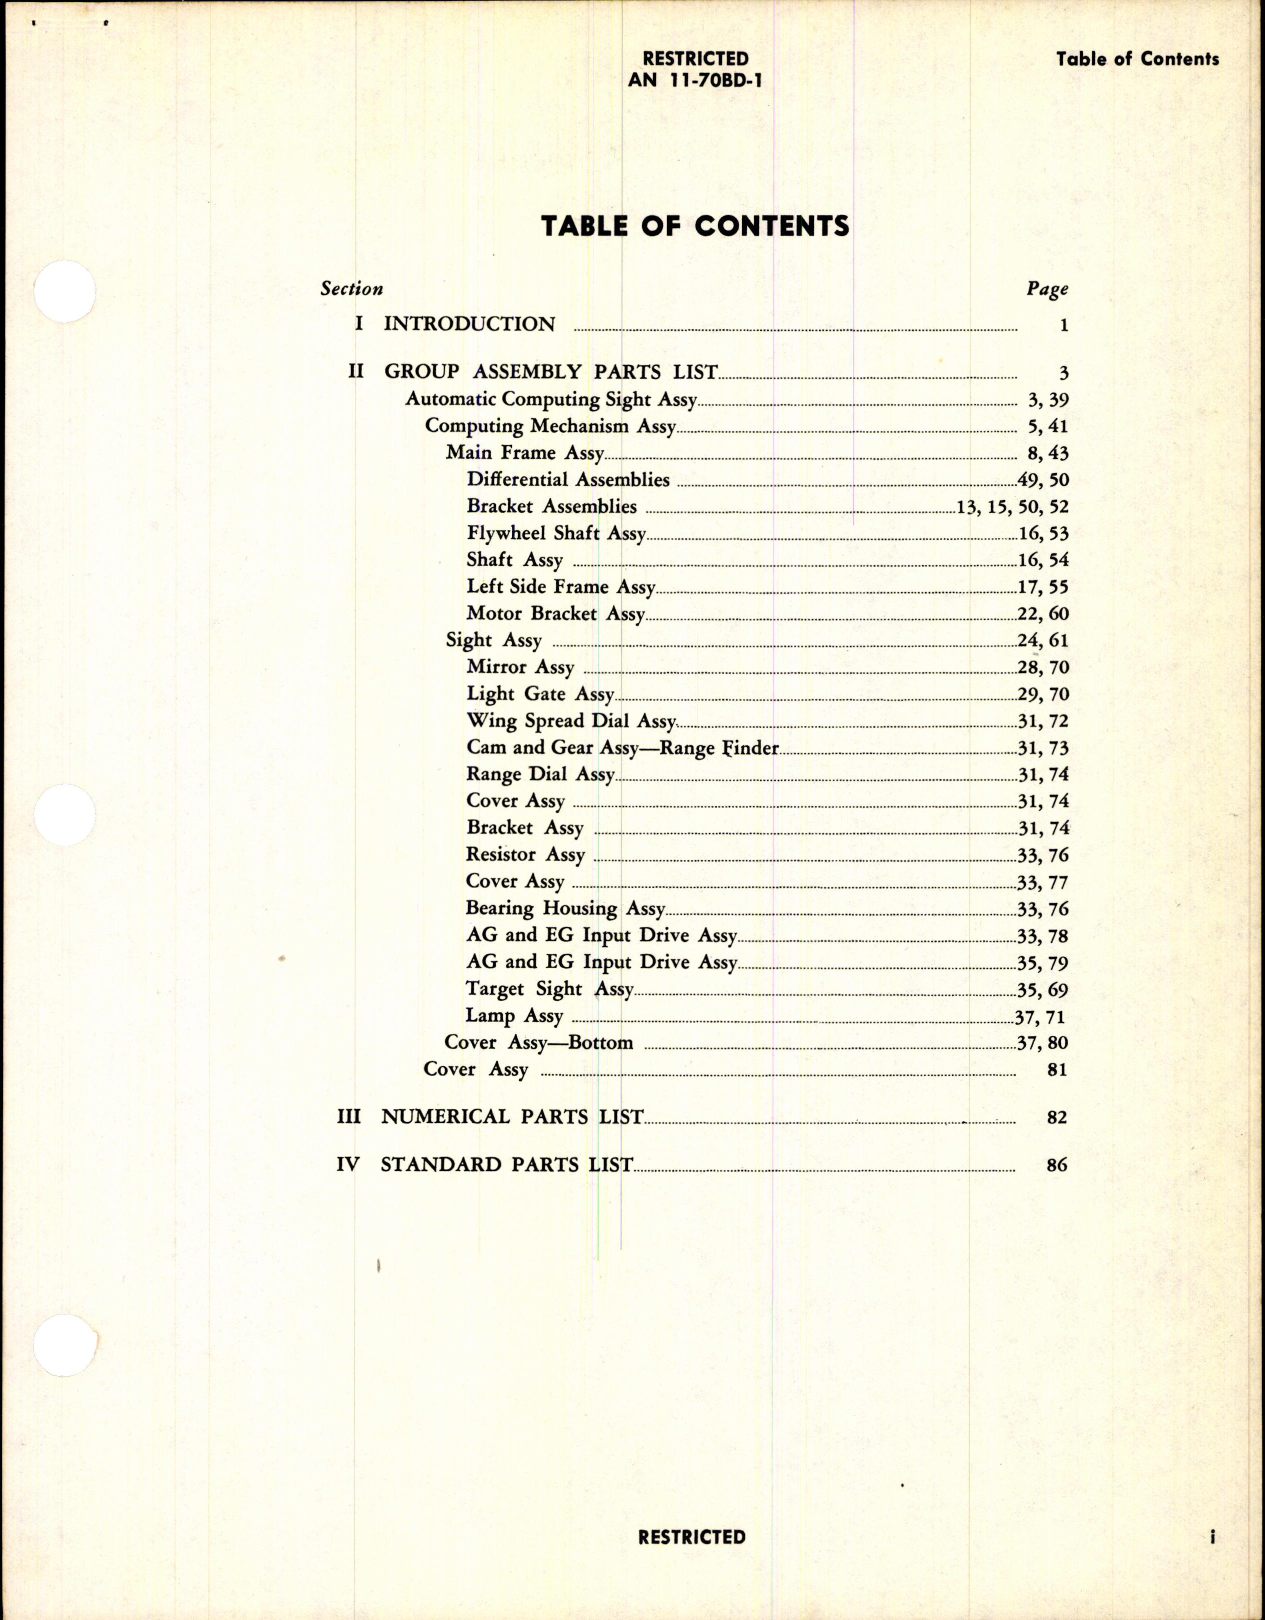 Sample page 3 from AirCorps Library document: Parts Catalog for Automatic Computing Sight Type K-3 and K-4